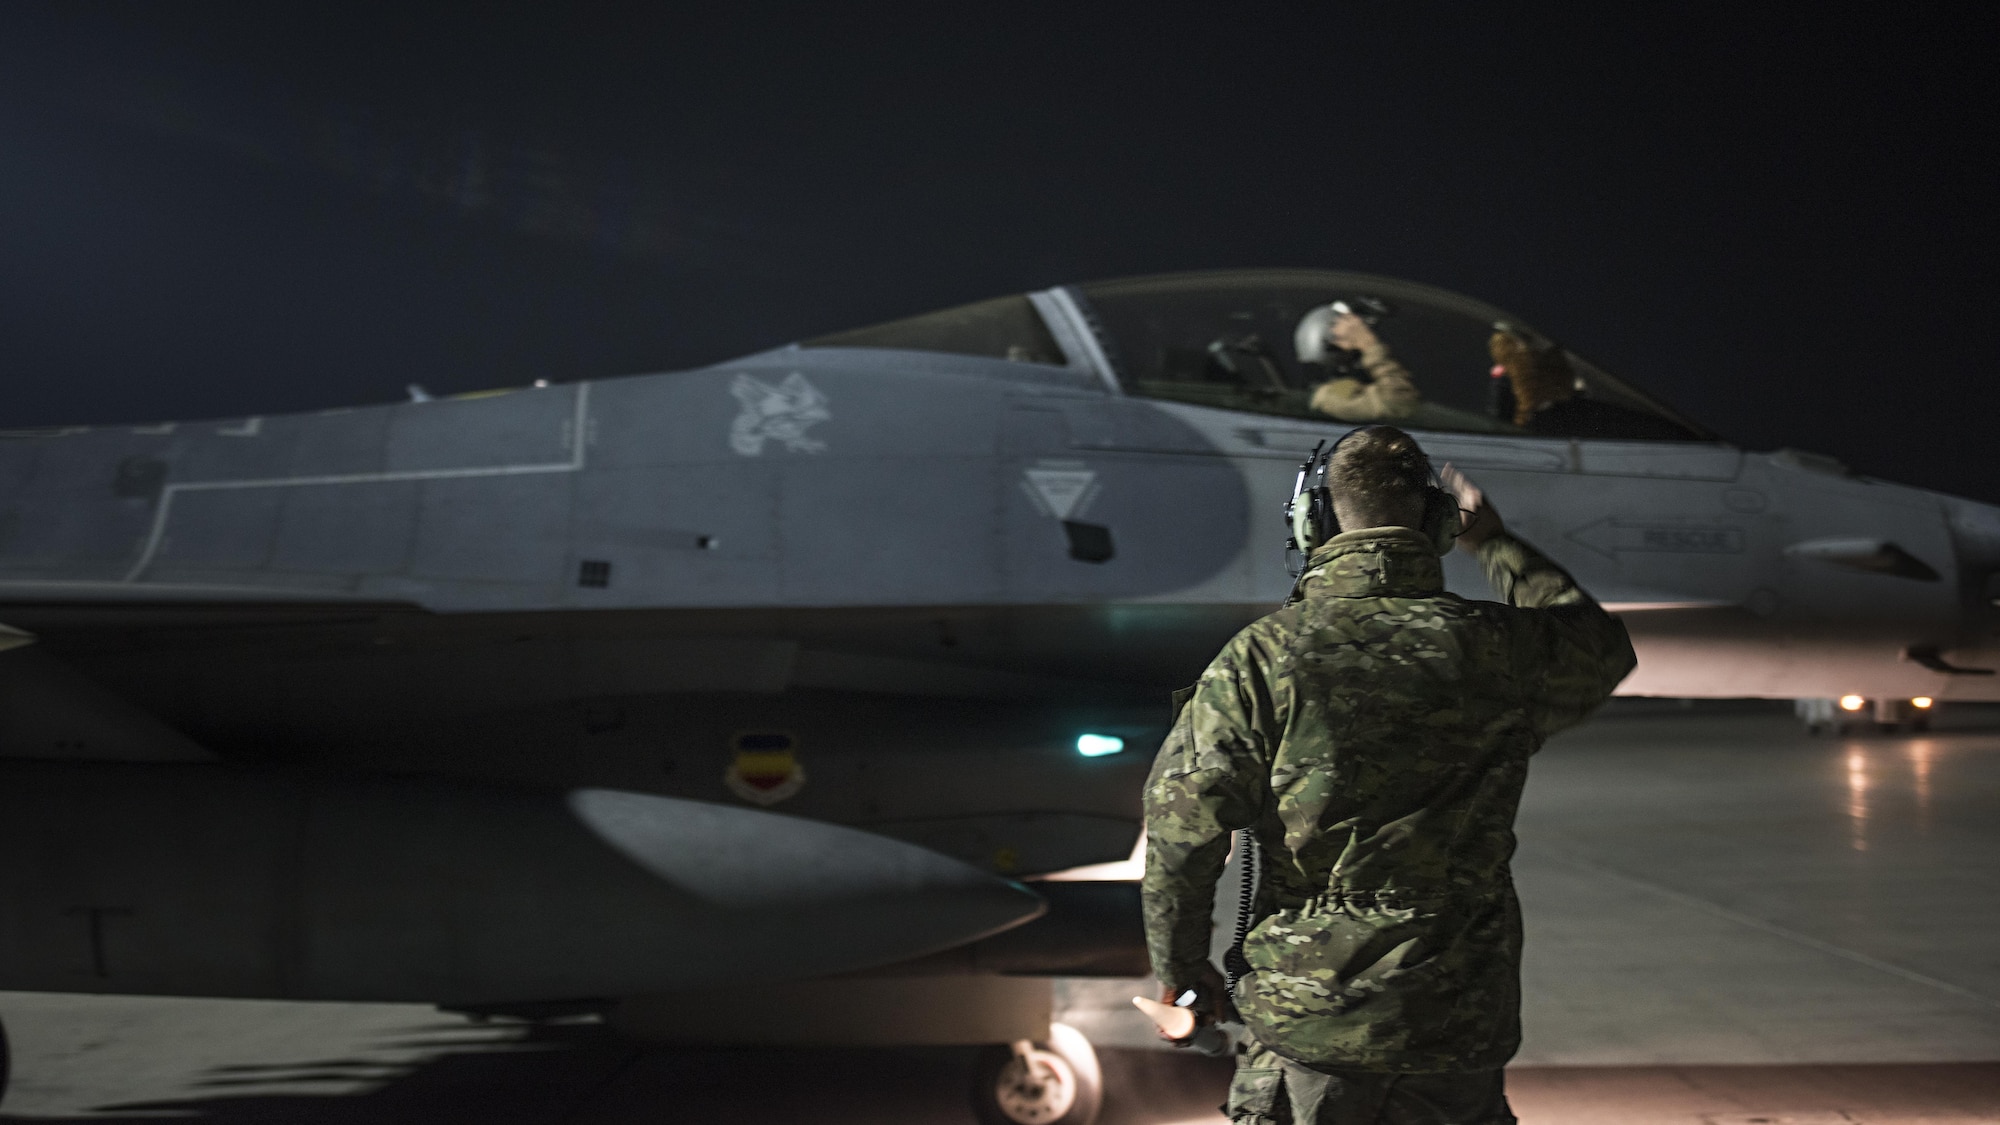 Capt. David, 79th Expeditionary Fighter Squadron pilot, and Staff Sgt. Daniel Lasal, 455th Expeditionary Aircraft Maintenance Squadron dedicated crew chief, salute one another before a night mission Jan. 13, 2017 at Bagram Airfield, Afghanistan. David enlisted in the Air Force in 2004 as an F-16 Fighting Falcon avionics specialist and now flies the same airframe he used to be a maintainer for. (U.S. Air Force photo by Staff Sgt. Katherine Spessa)